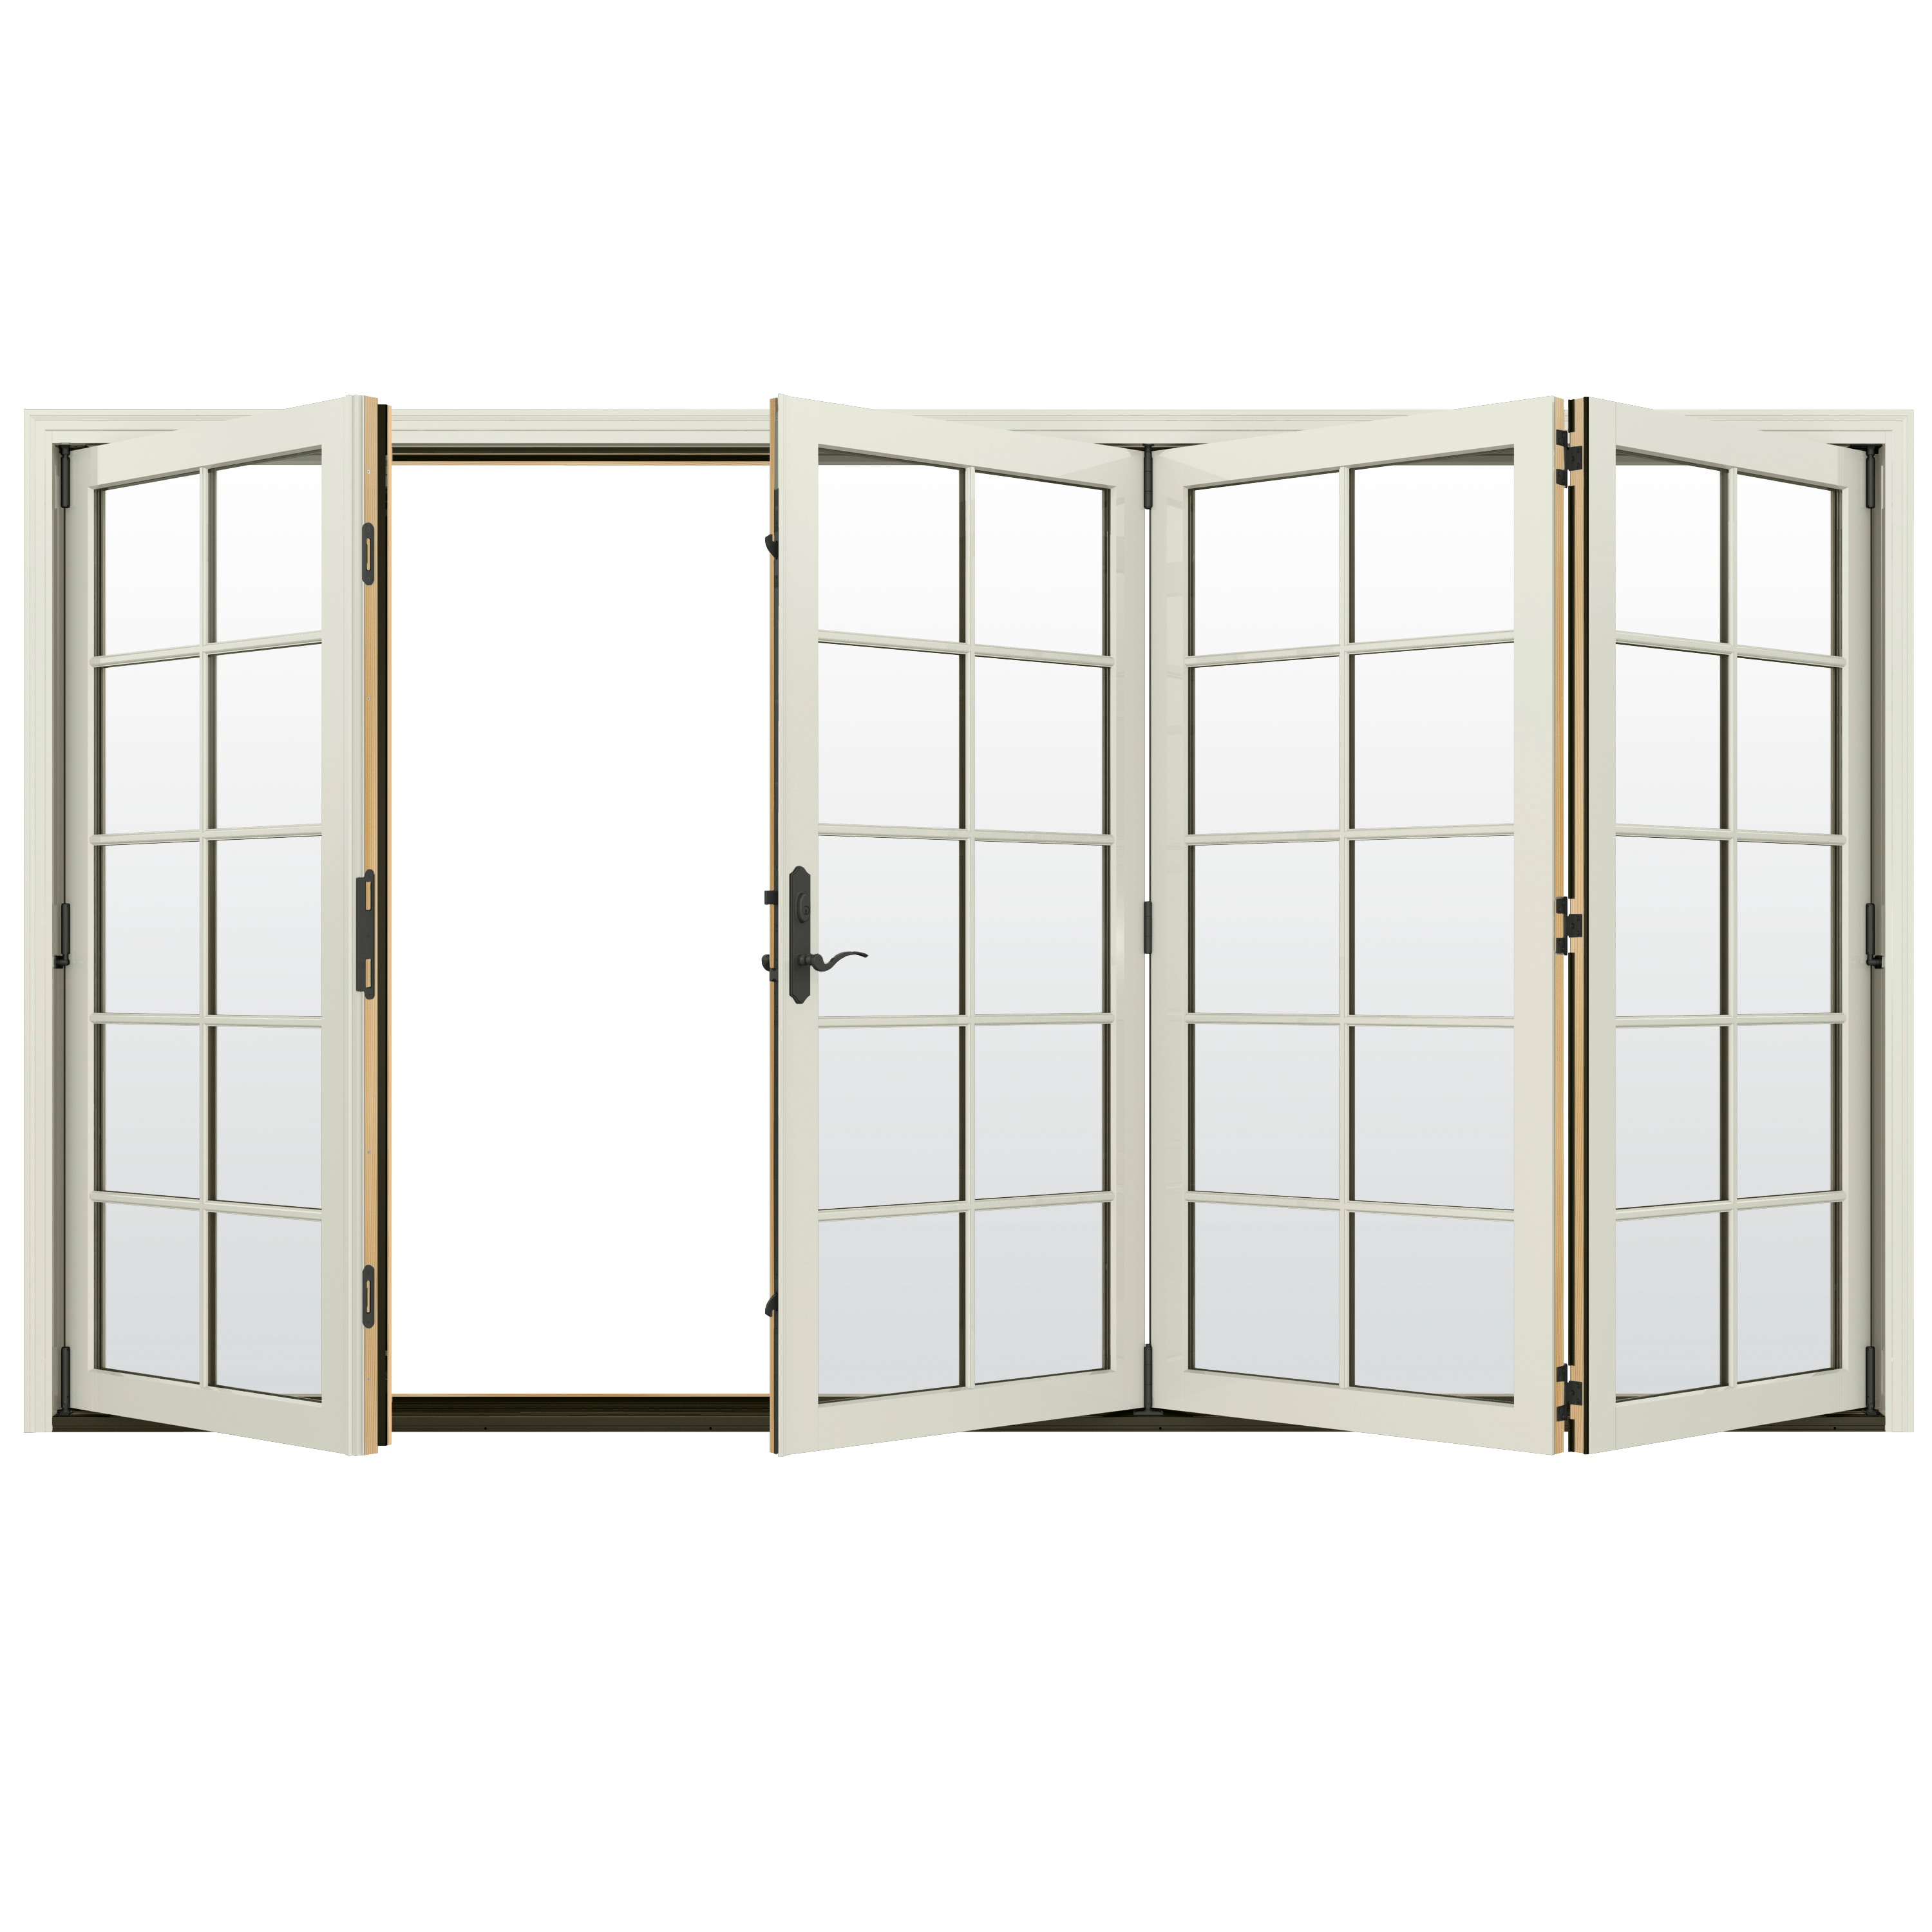 124-in x 96-in Low-e Argon Simulated Divided Light Vanilla Clad-wood Folding Right-Hand Outswing Patio Door in Off-White | - JELD-WEN LOWOLJW247800085